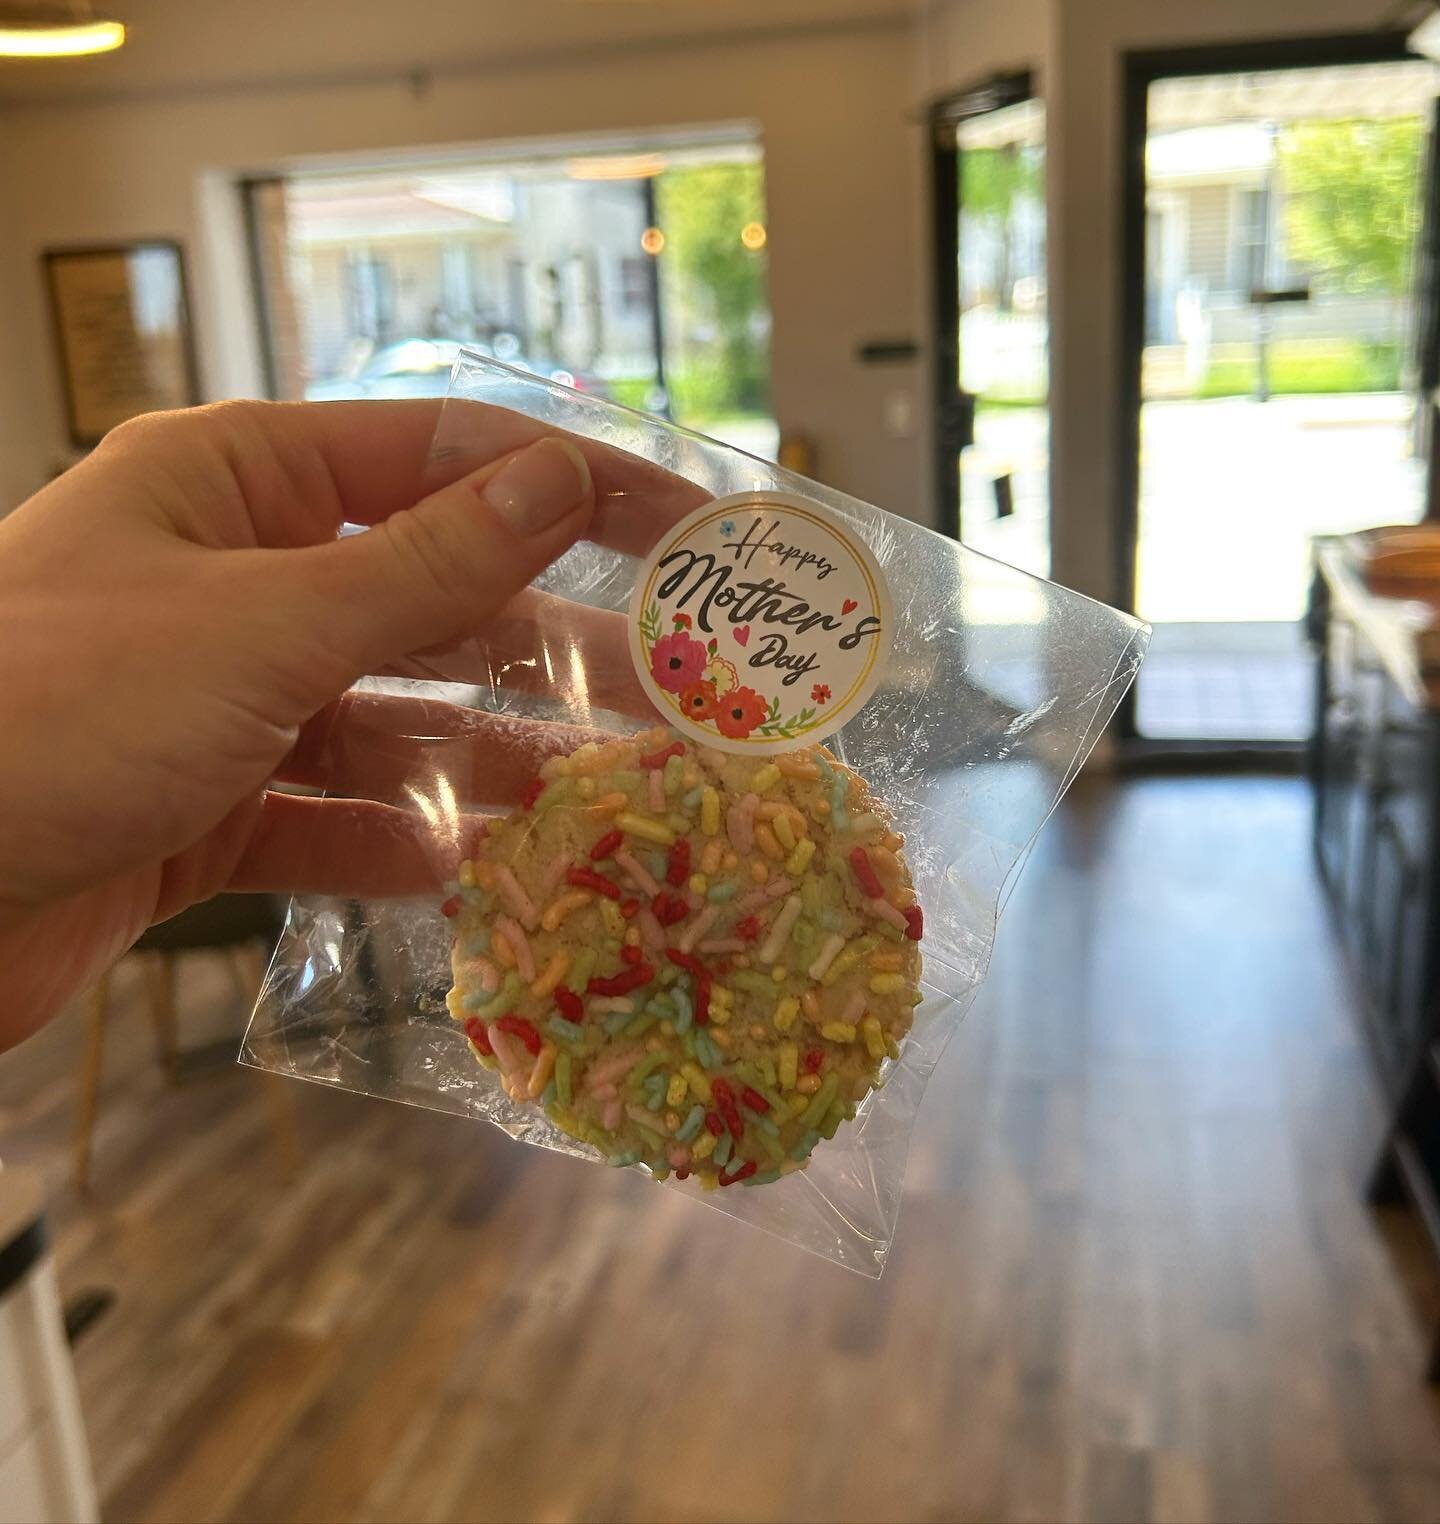 This Sunday is Mother&rsquo;s Day! On Saturday, Fika is giving a free confetti cookie to each mom/&ldquo;mom to be&rdquo; with any purchase! To all the moms, let us treat you! Happy Mother&rsquo;s Day!

Open 7-3: Monday-Saturday

#fikacoffeebar #moth